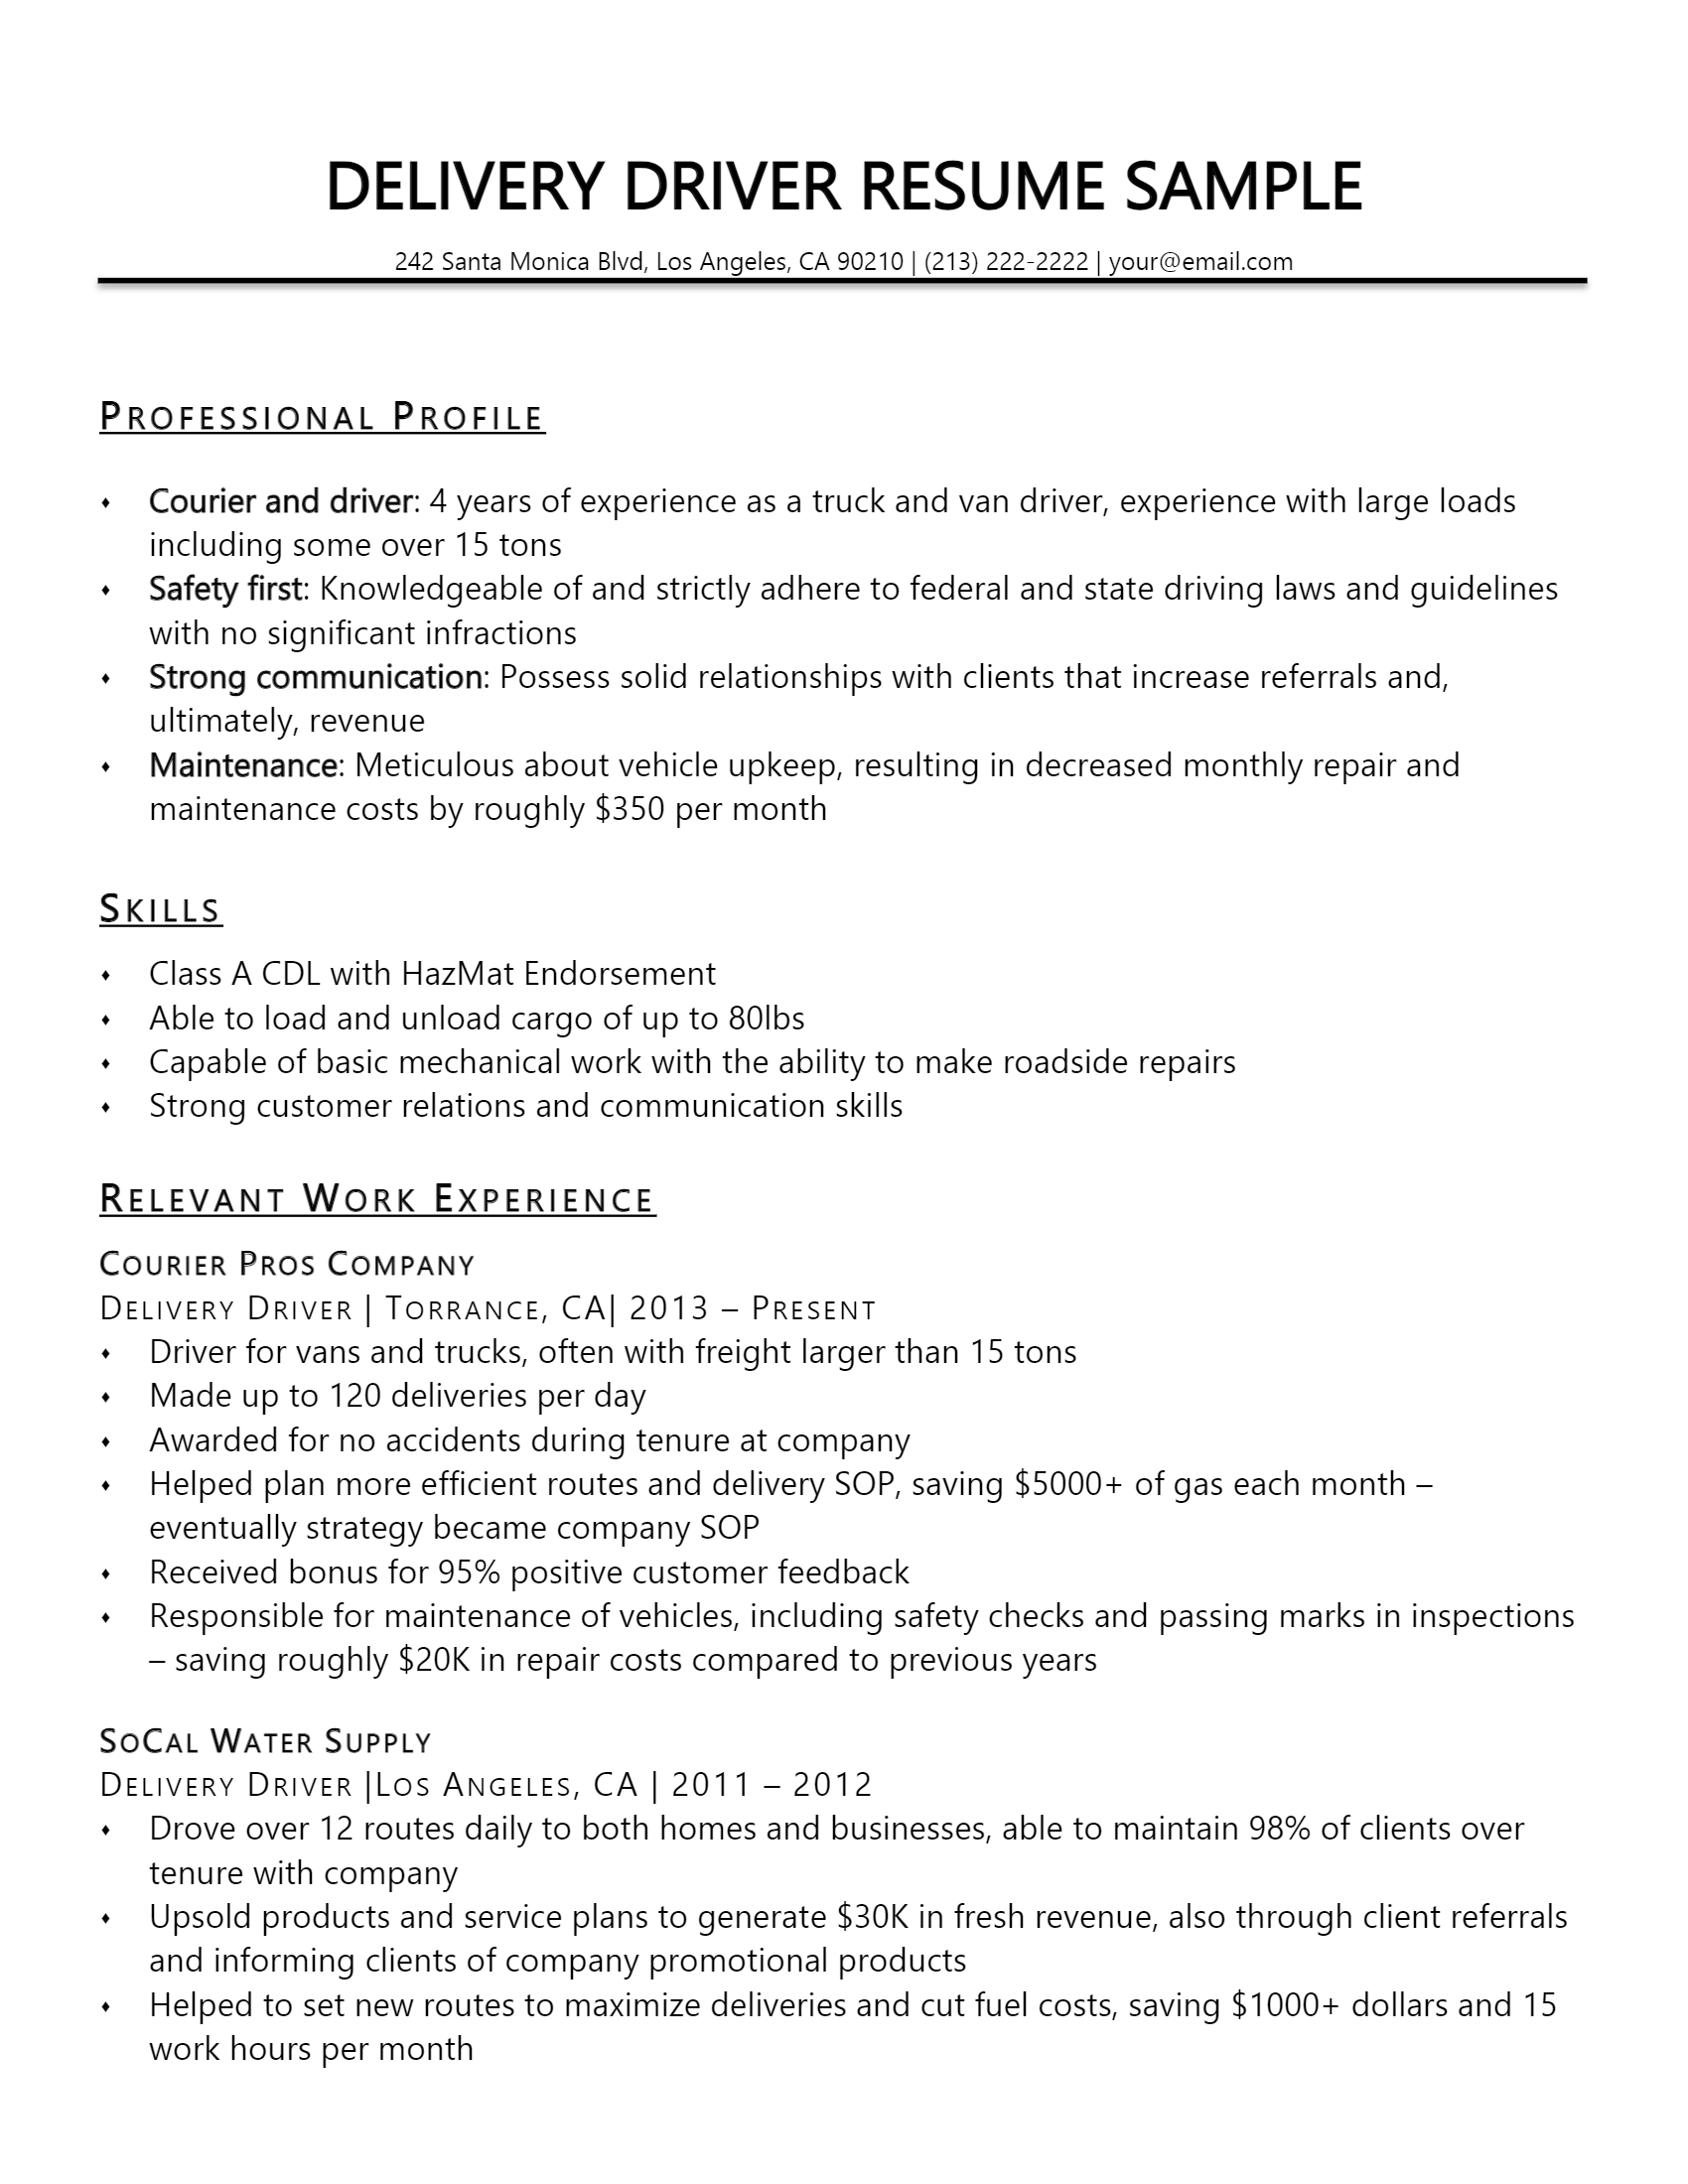 Delivery Driver Resume .Docx (Word)